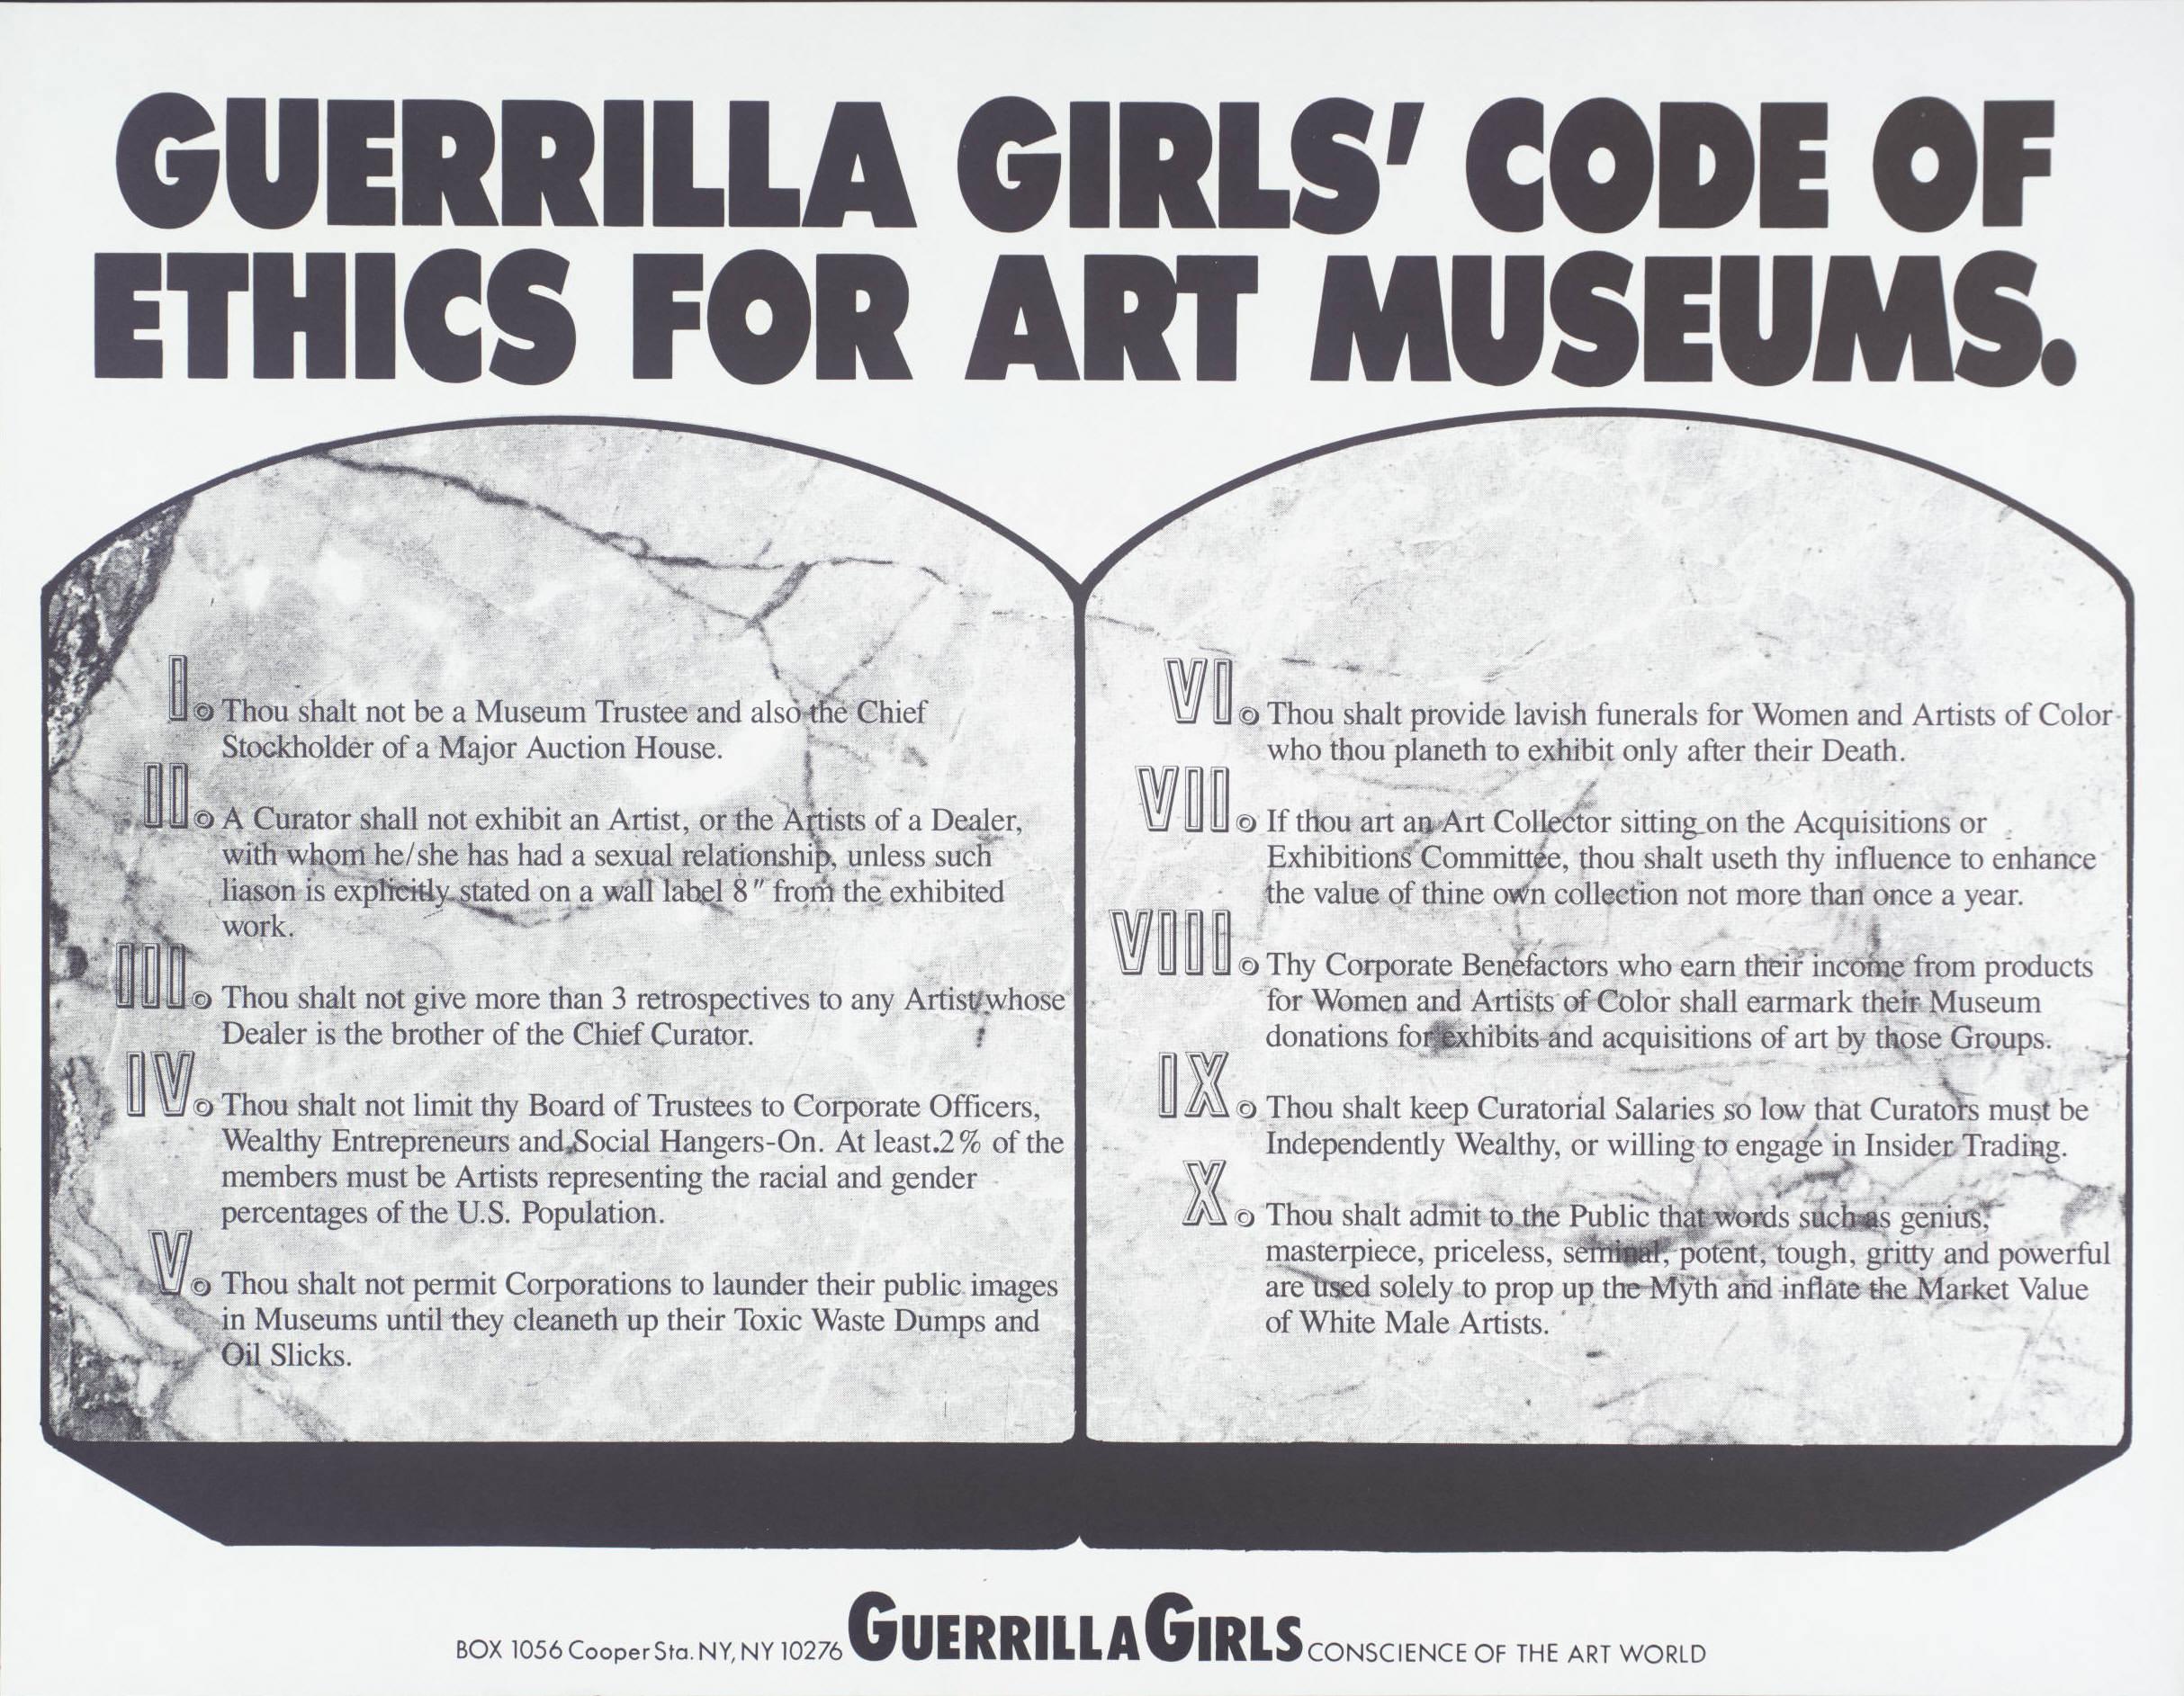 P78795: Guerrilla Girls’ Code Of Ethics For Art Museums